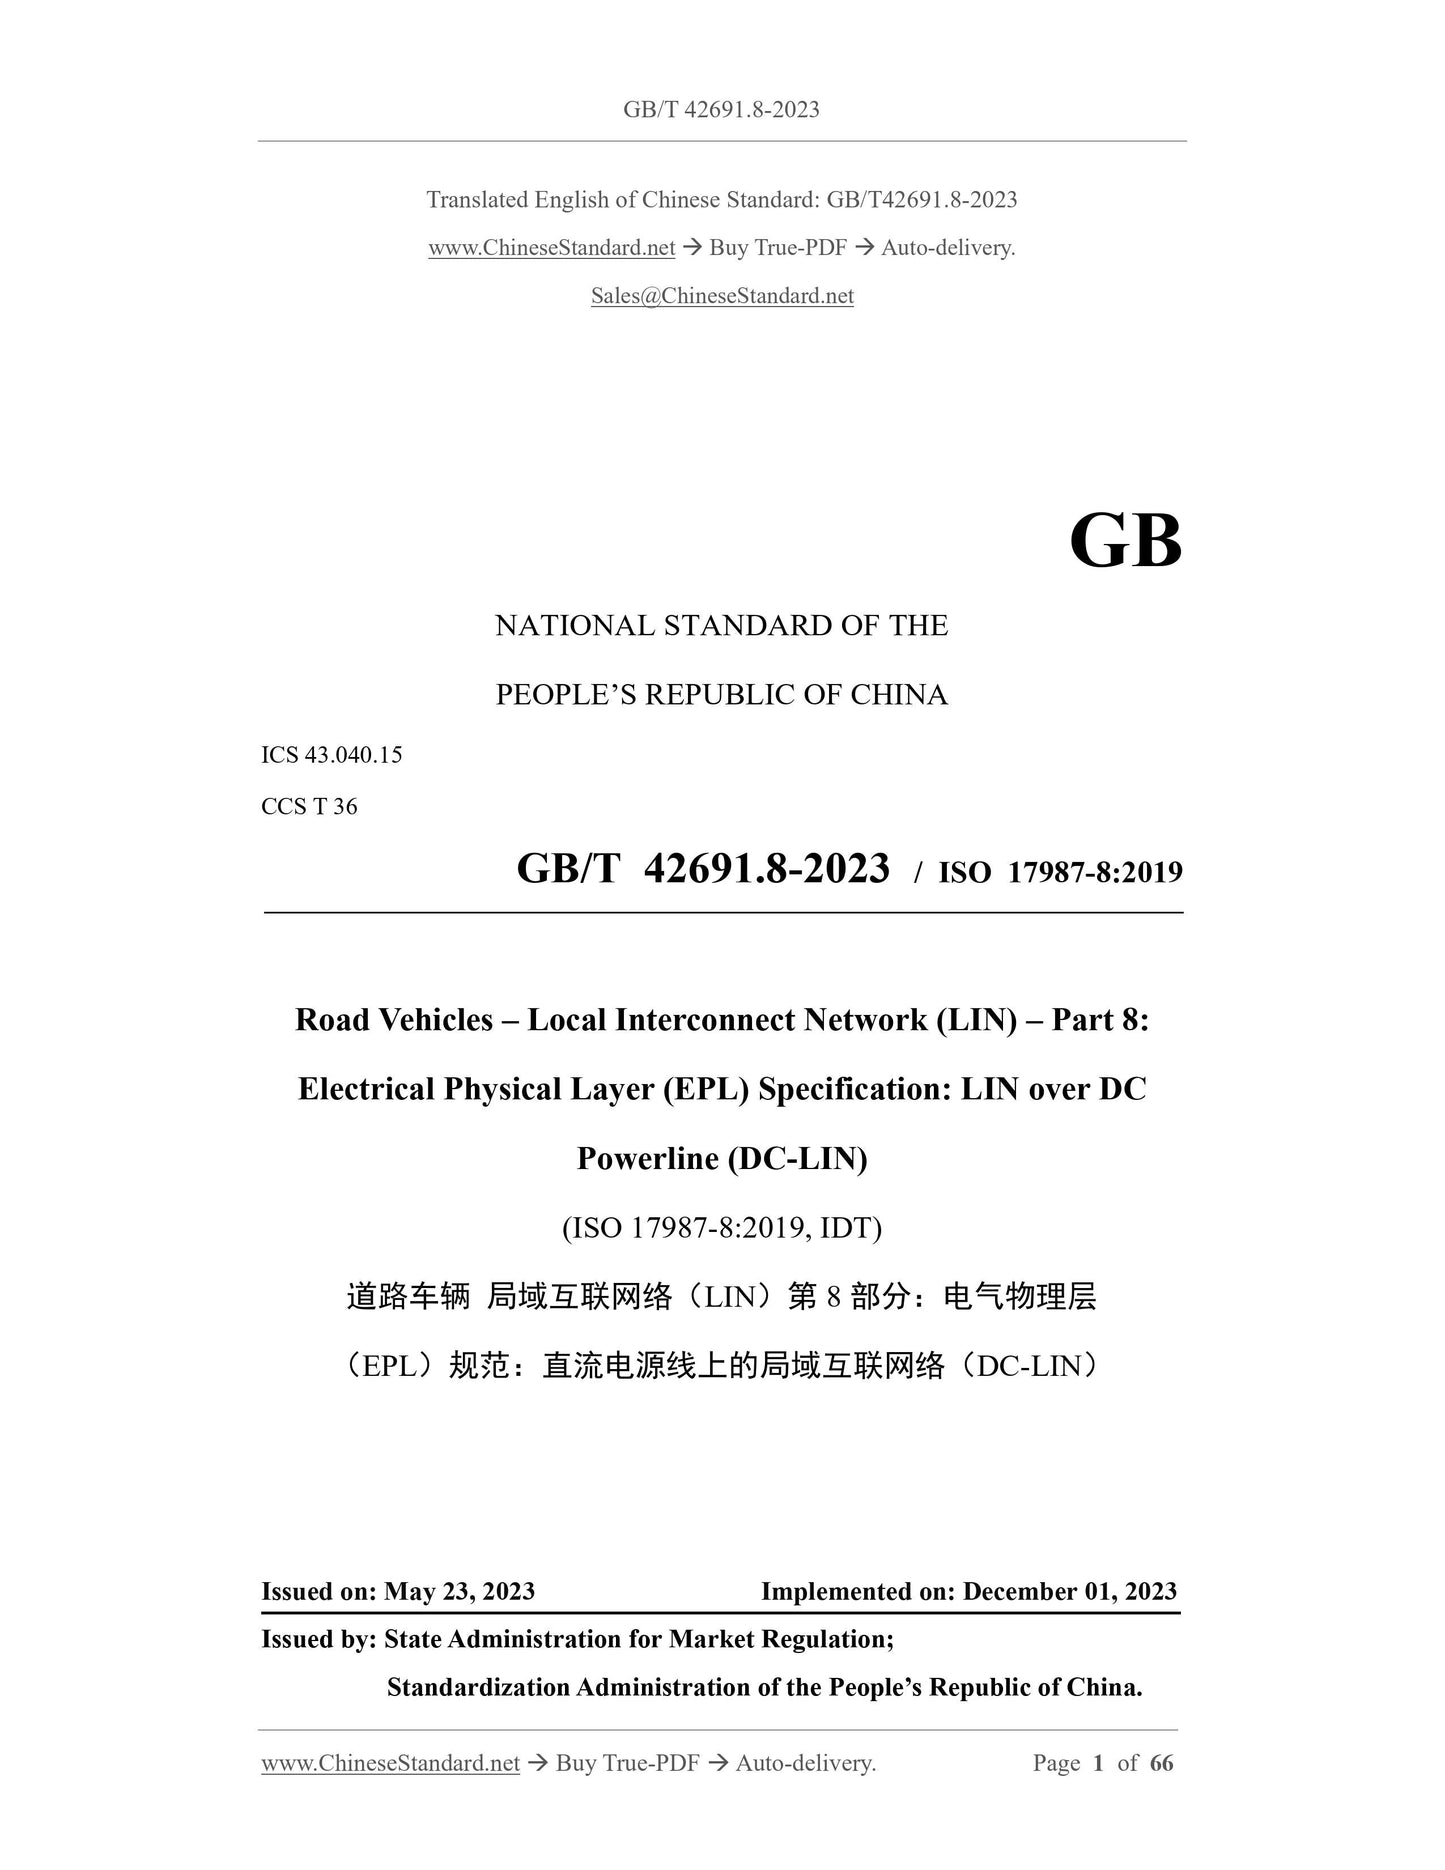 GB/T 42691.8-2023 Page 1